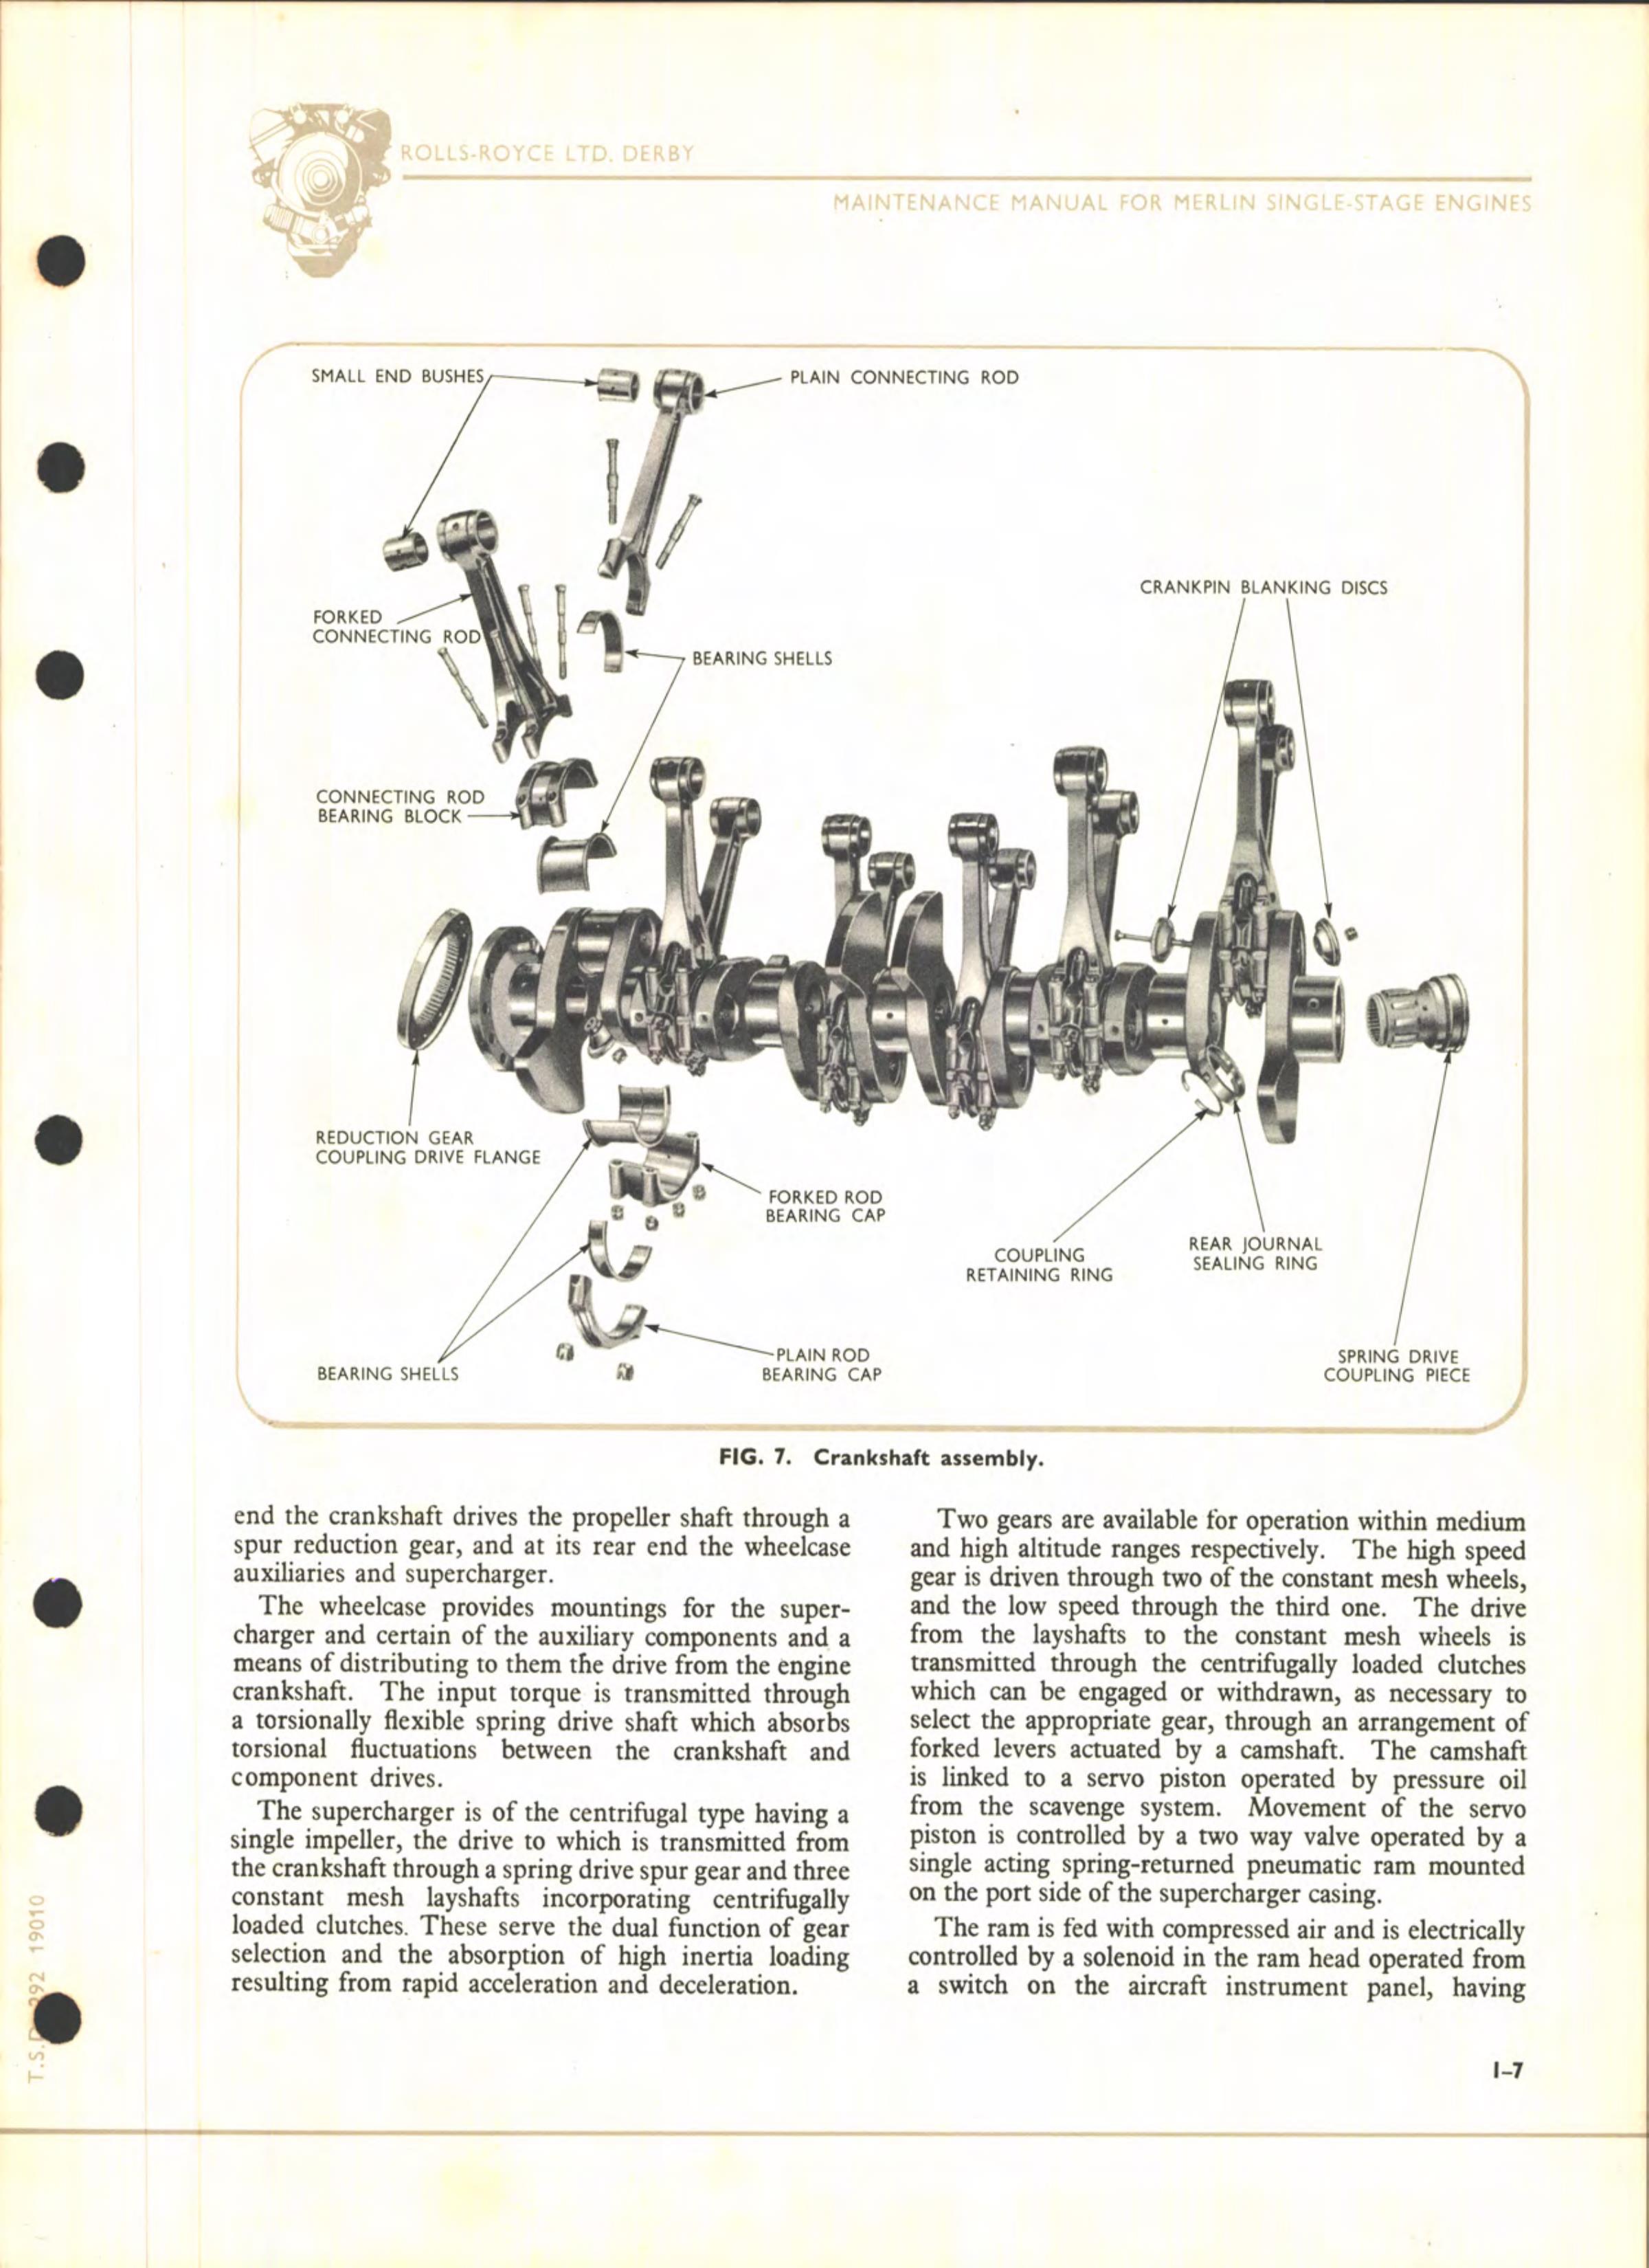 Sample page 25 from AirCorps Library document: Maintenance Manual for Single Stage Merlin Engines